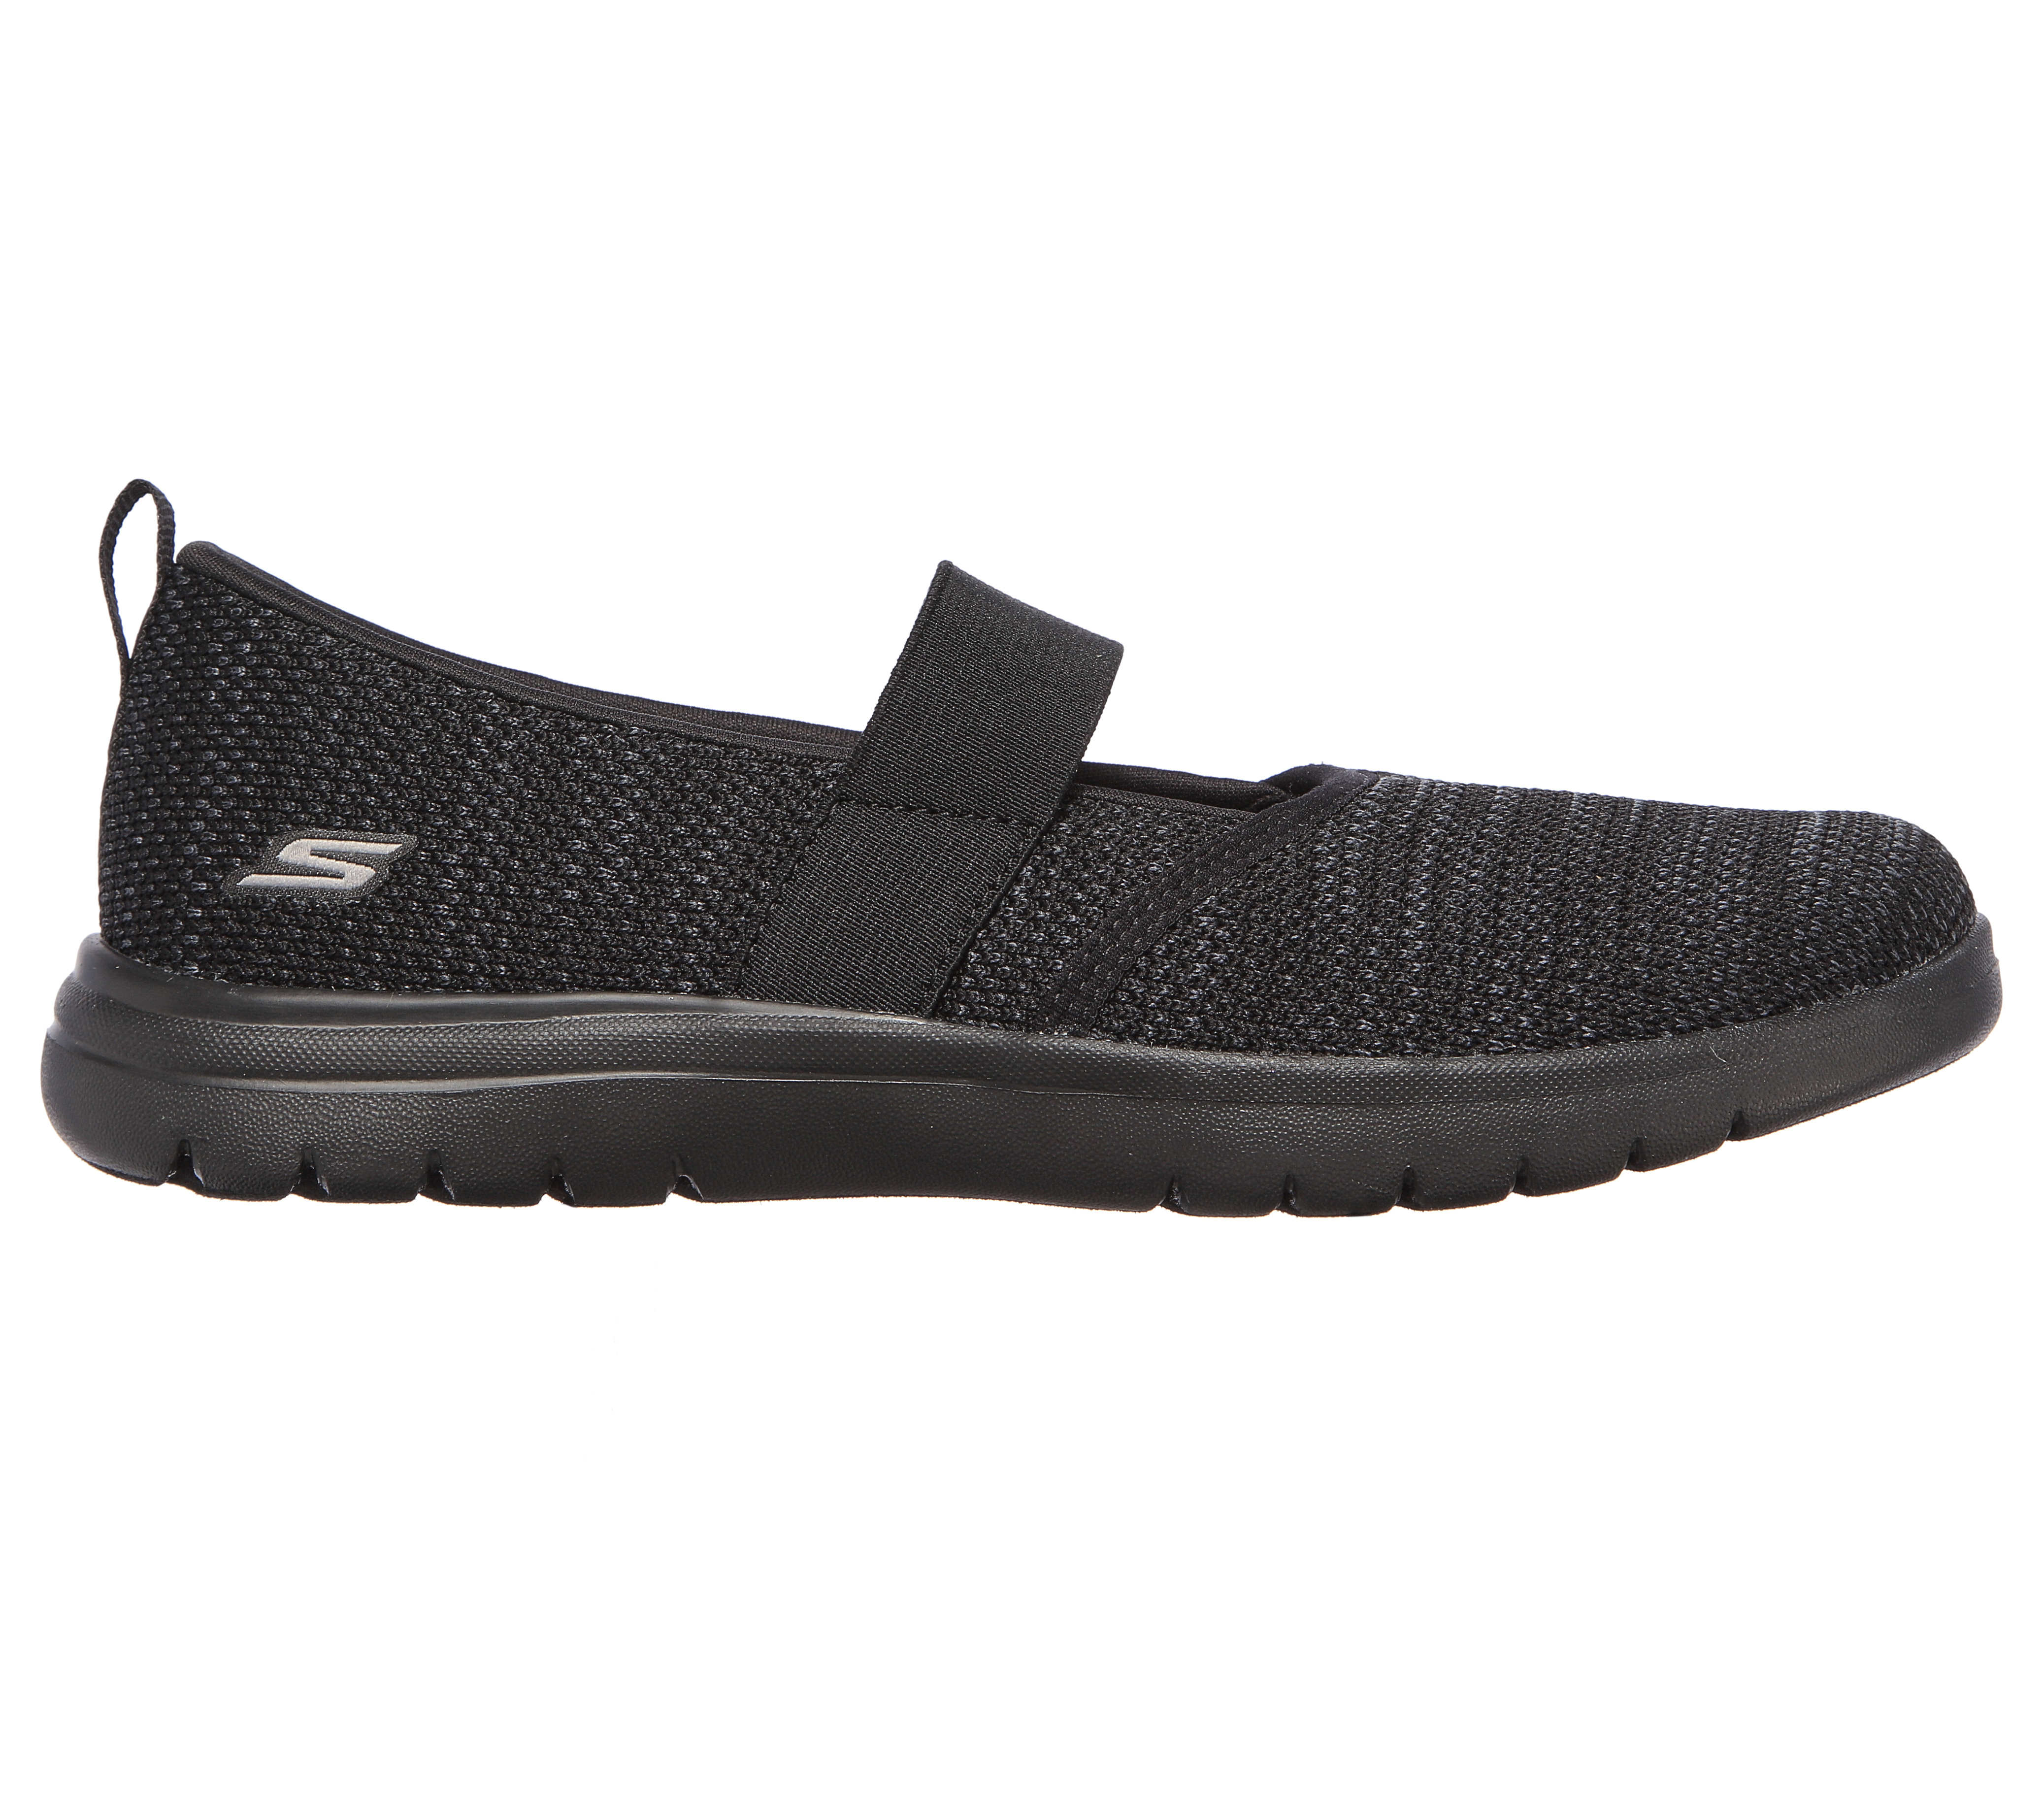 Shop the Skechers On the GO Flex 